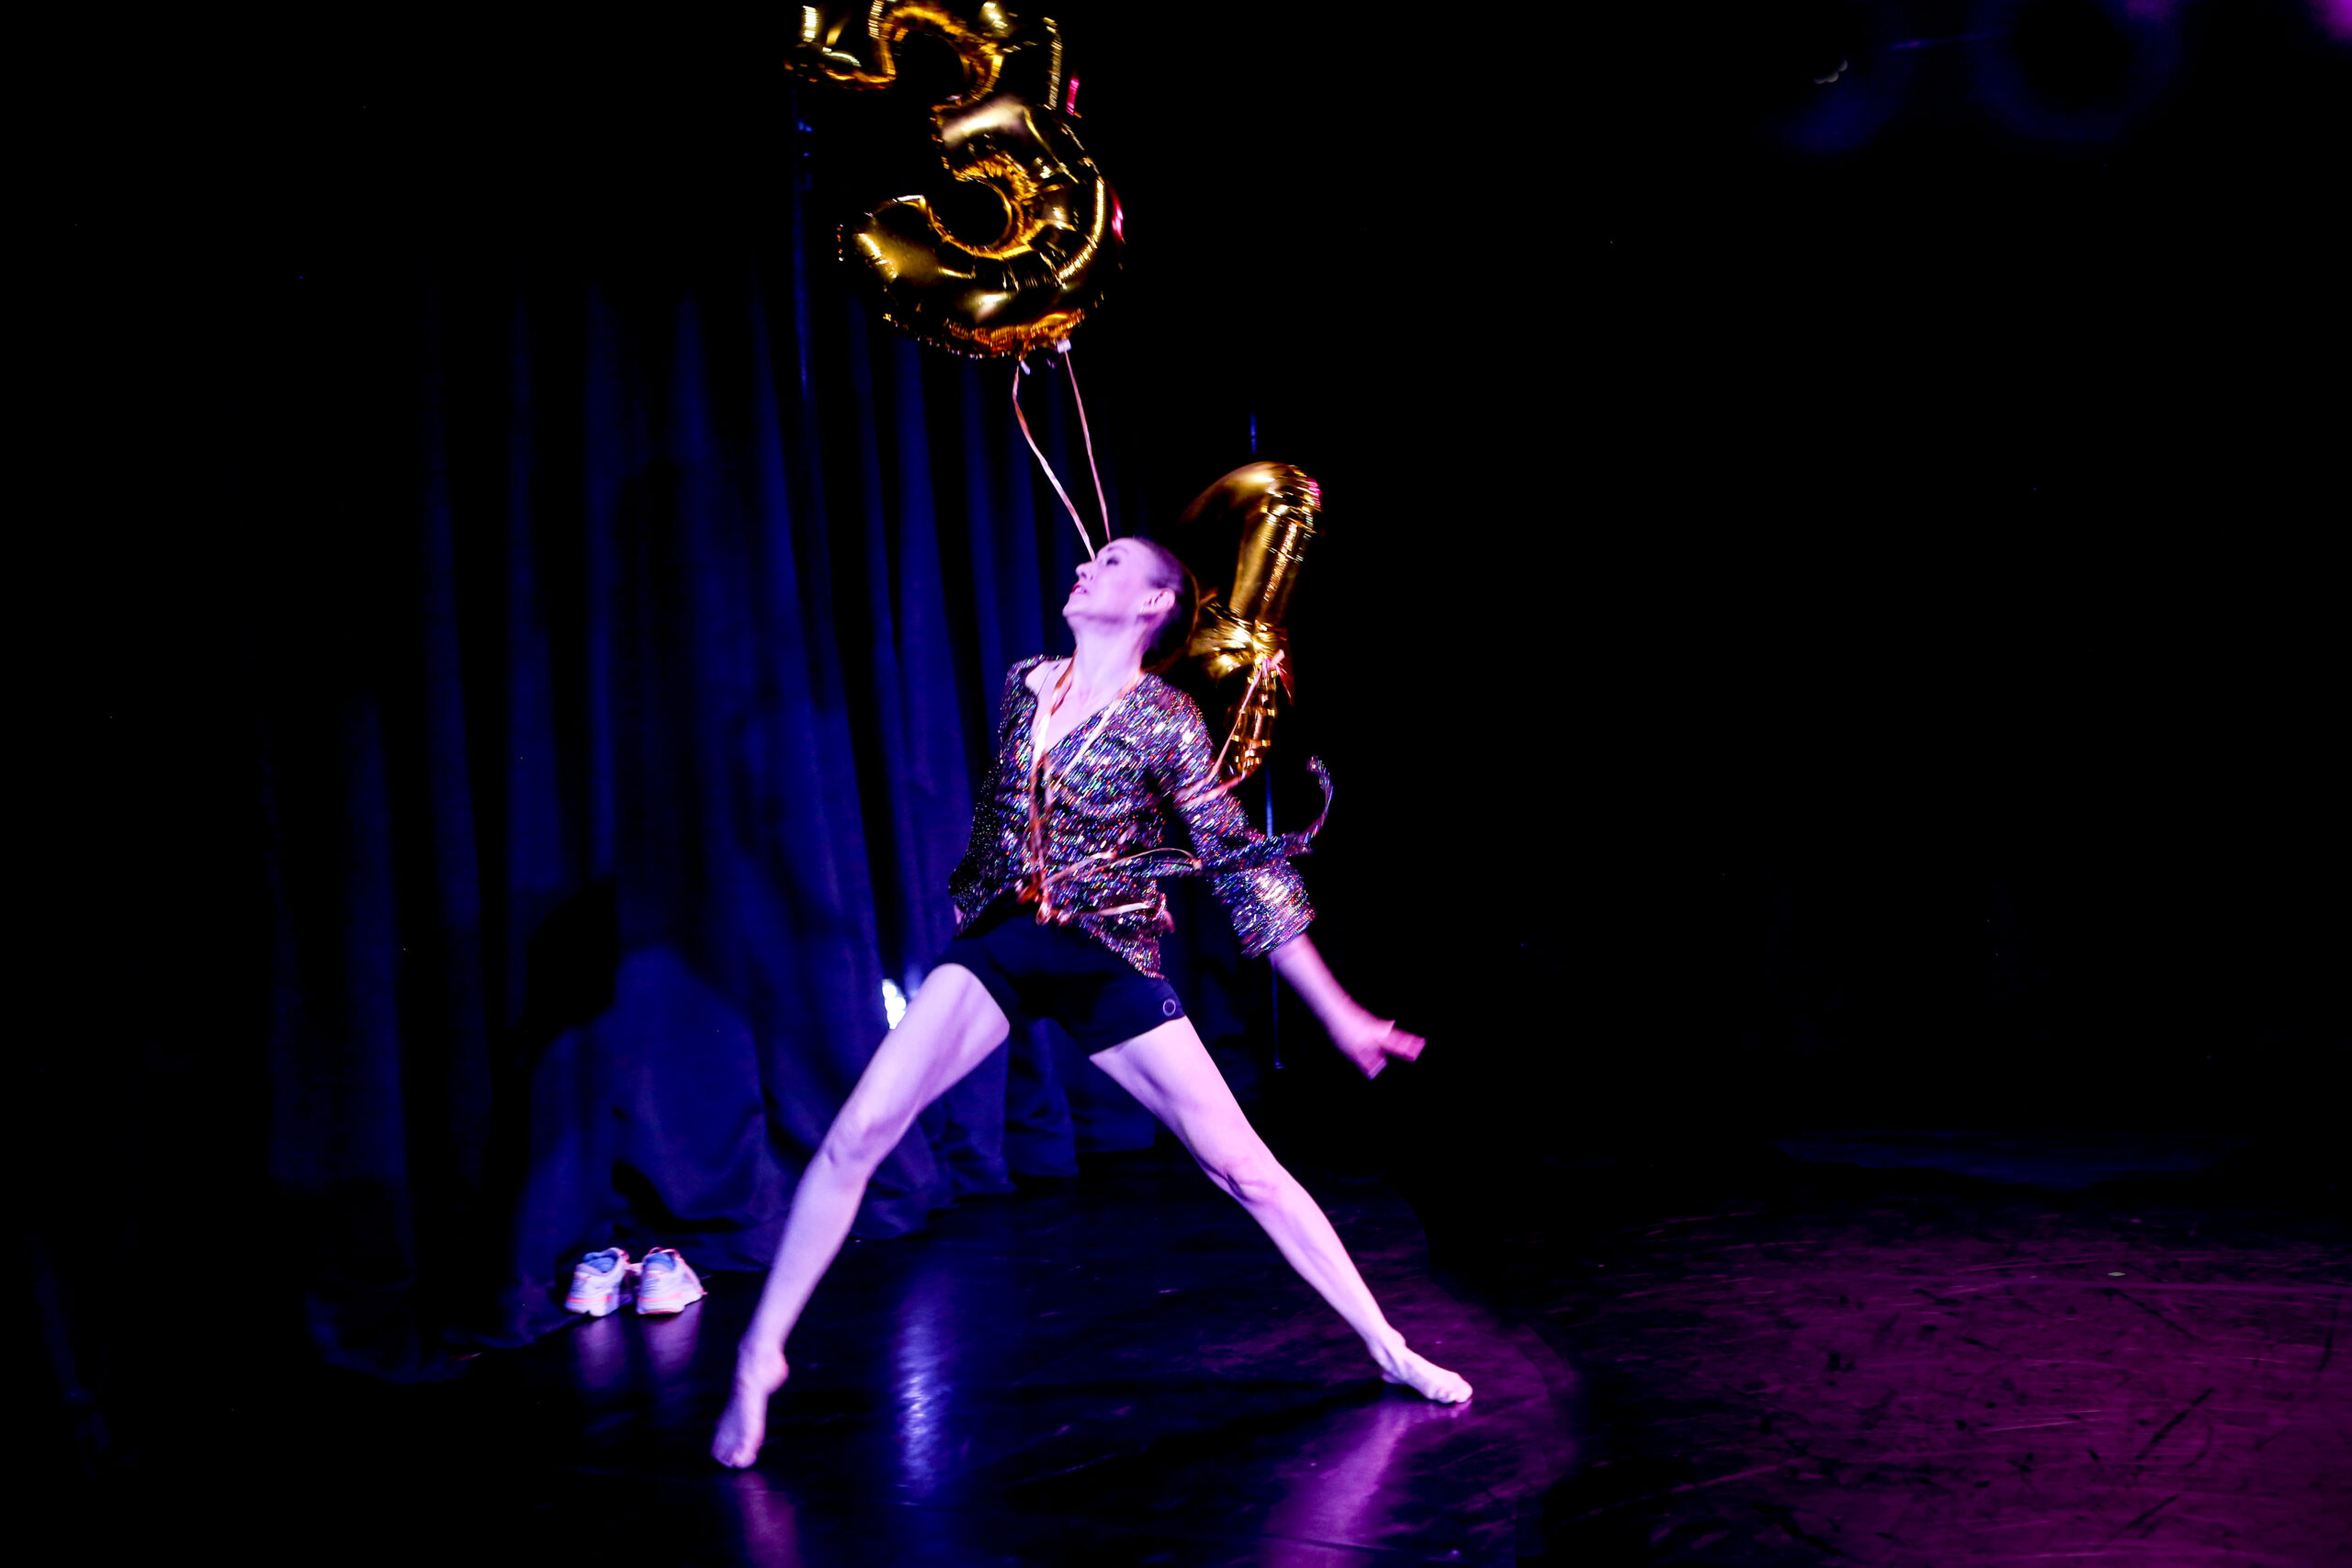 A dancer holding a balloon on stage.